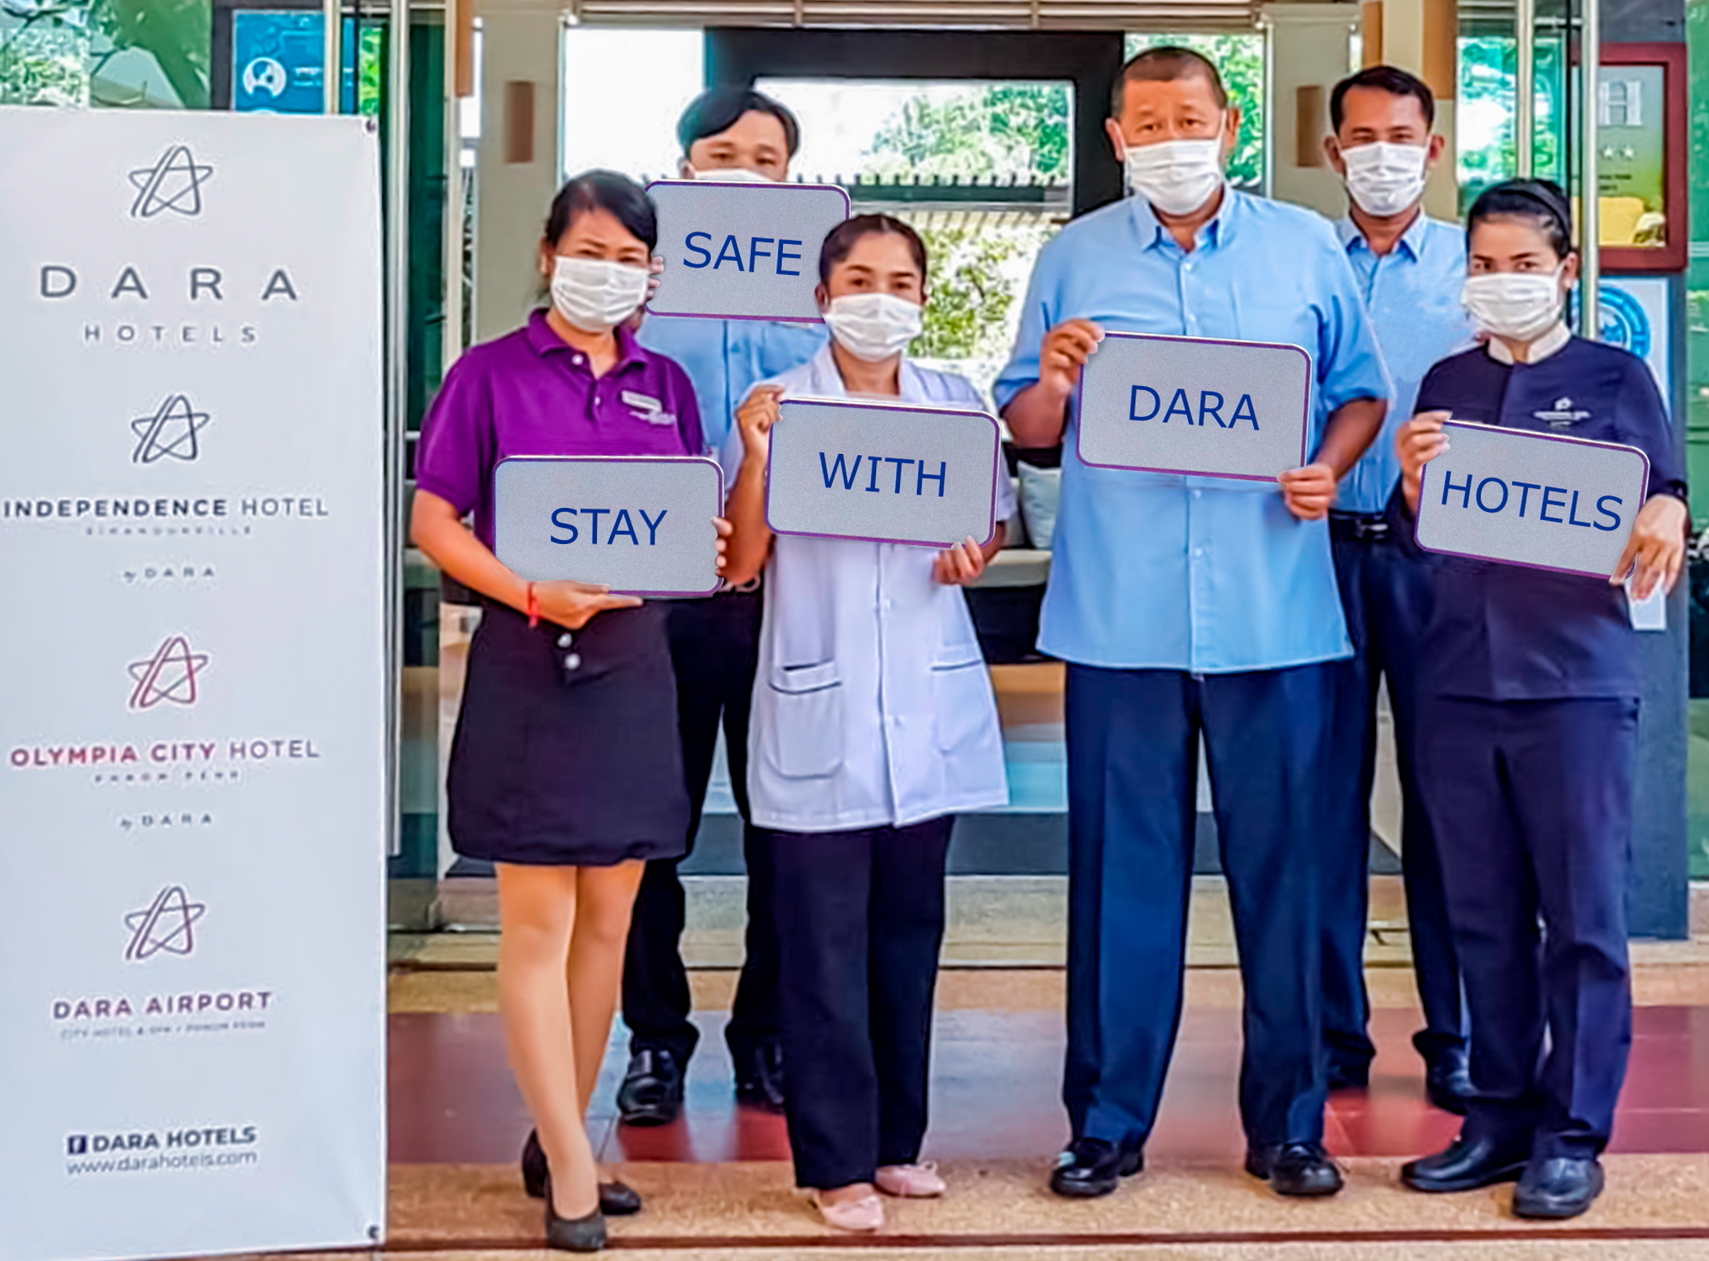 Employees of the Dara Independence Hotel promote 'Stay Safe with Dara Hotels' programme. Click to enlarge.